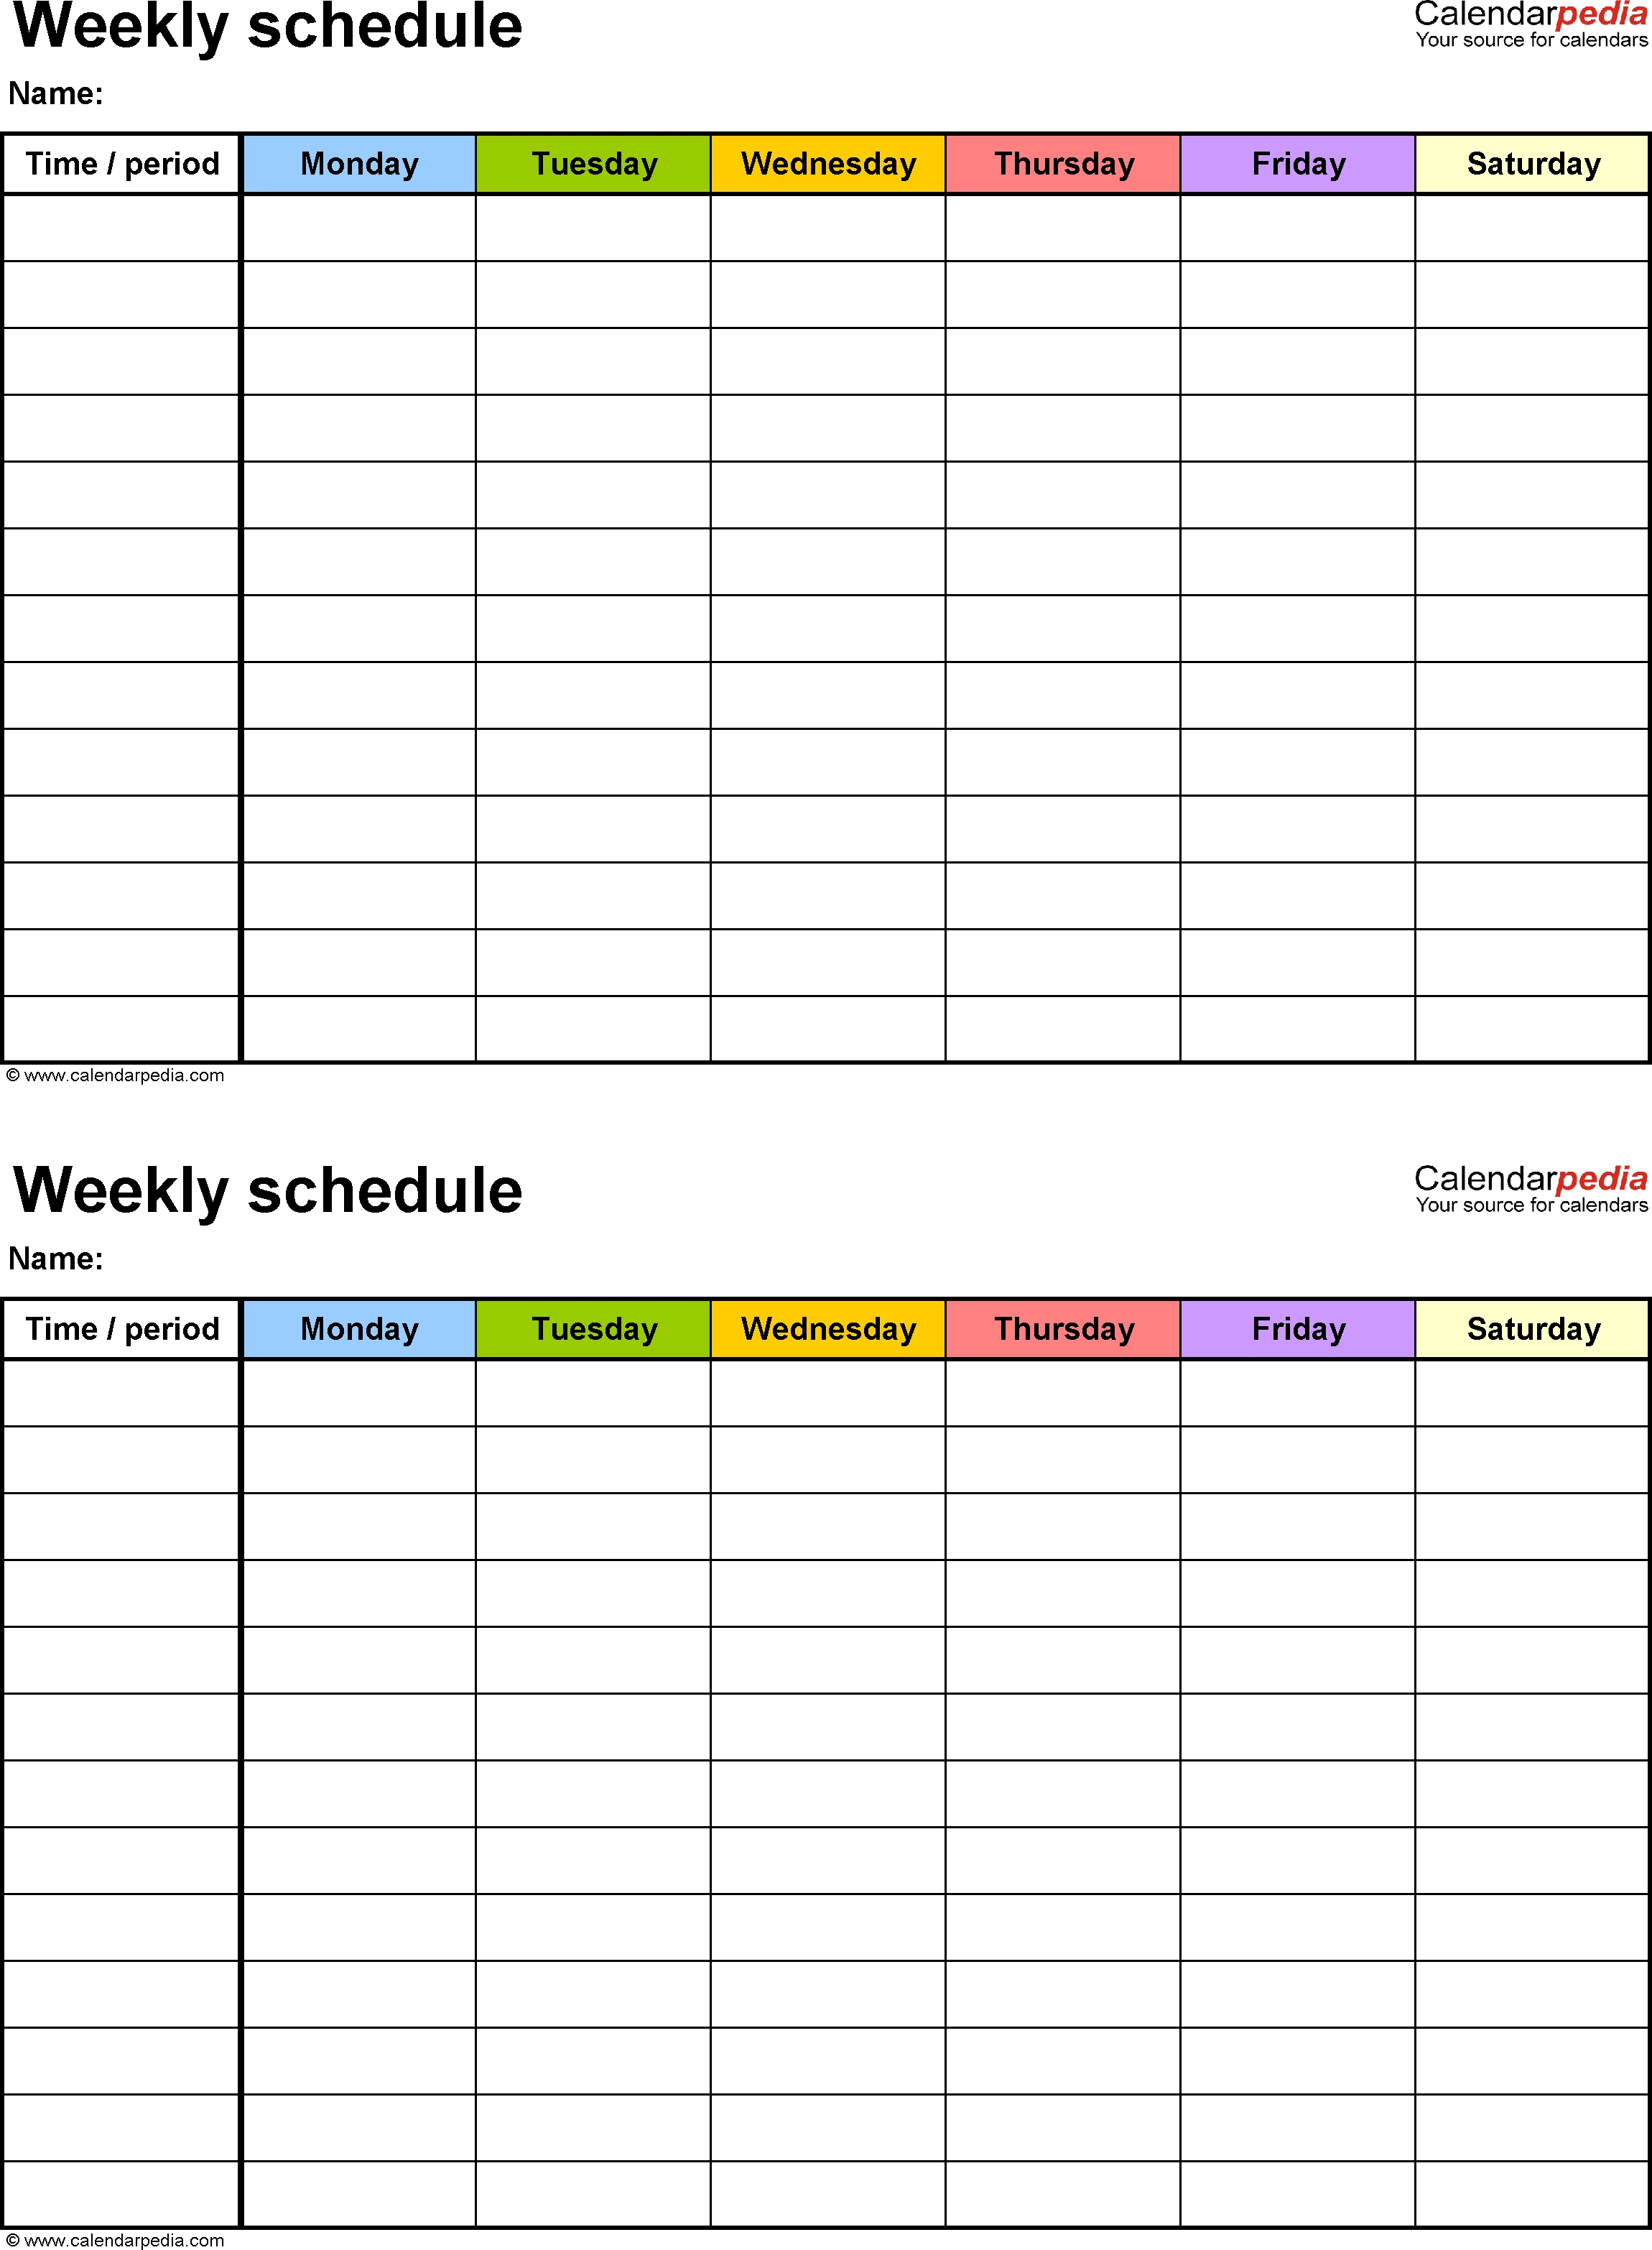 Free Weekly Schedule Templates For Word - 18 Templates intended for Monday To Friday Schedule Template